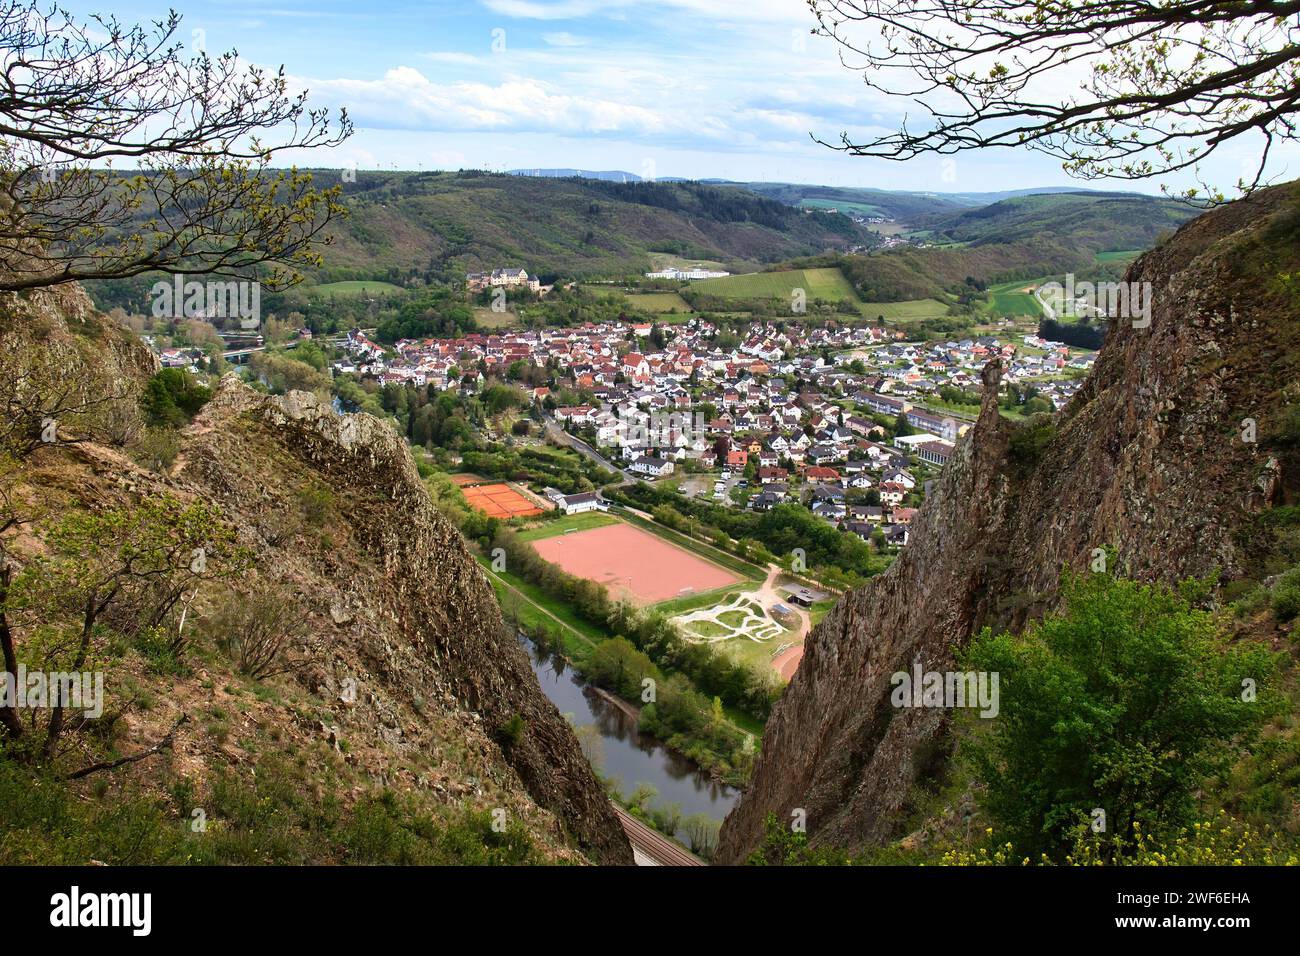 Bad Munster, Germany - May 9, 2021: Bad Munster below Rotenfels cliffs on a spring day in Germany. Stock Photo